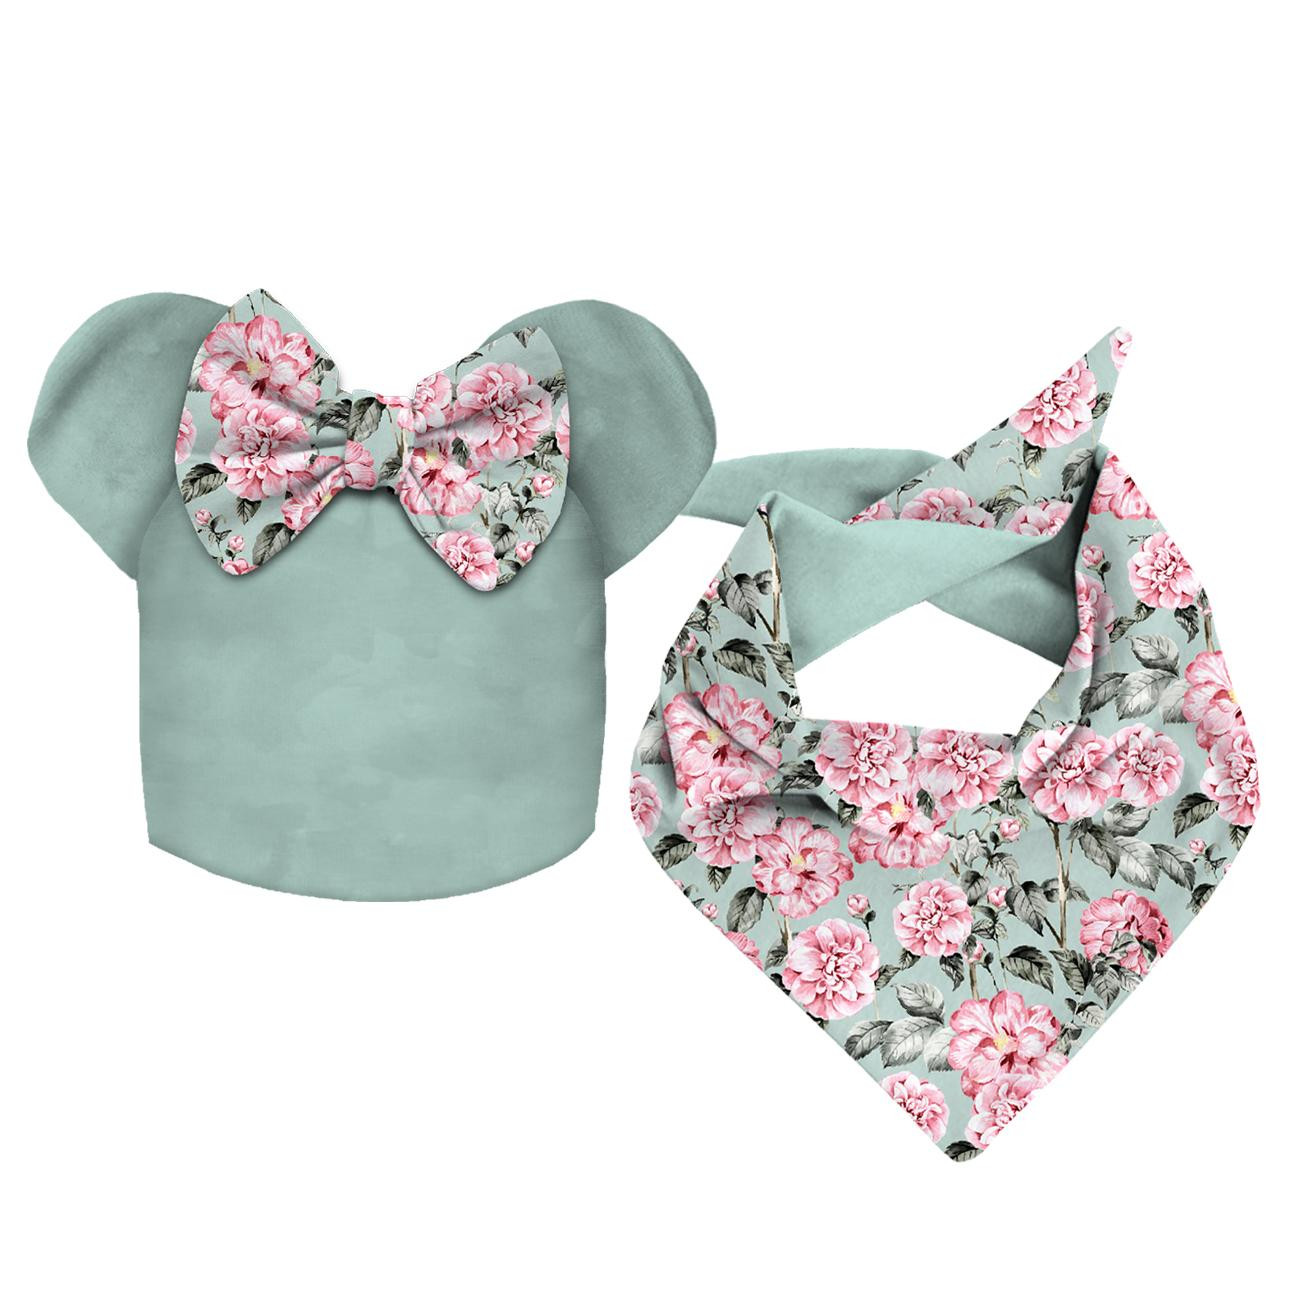 KID'S CAP AND SCARF (MOUSE) - PINK PEONIES pat. 1 - sewing set